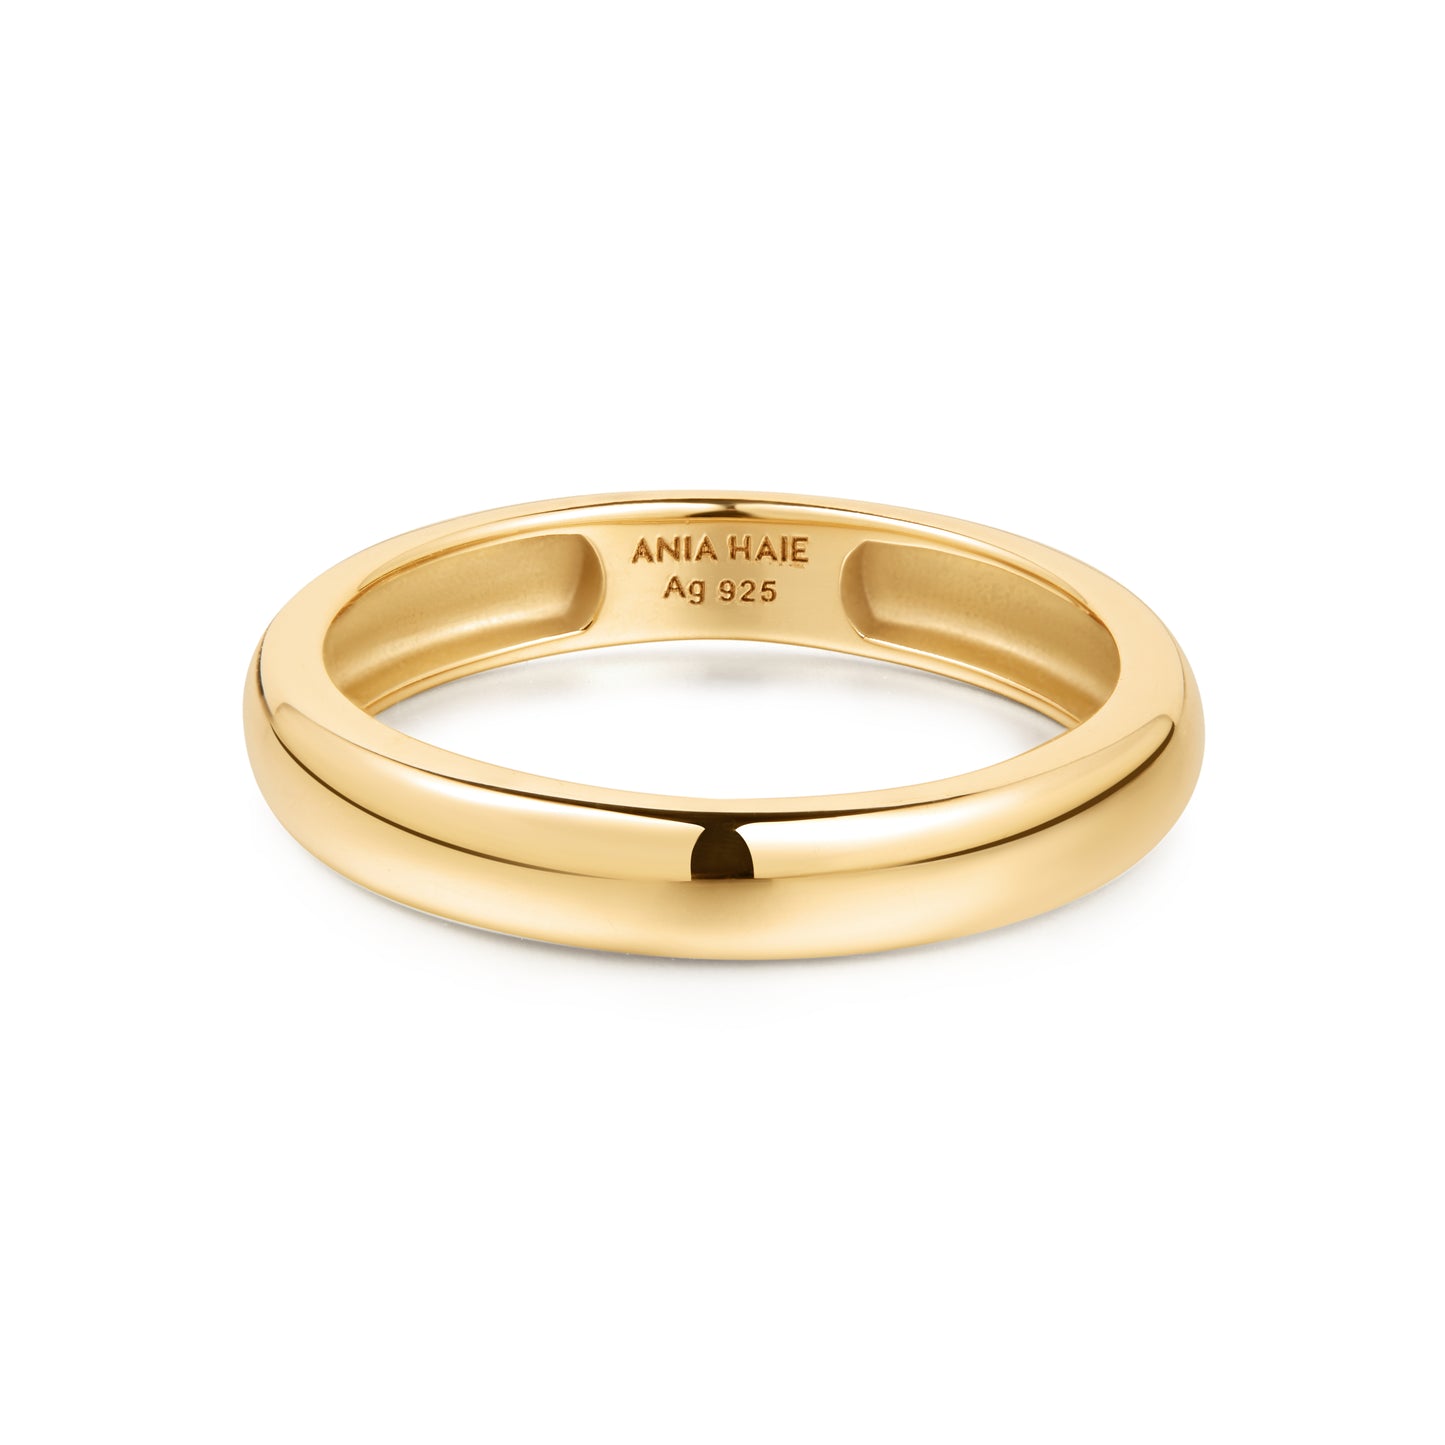 Ania Haie Gold Plate Curve Dome Band Ring